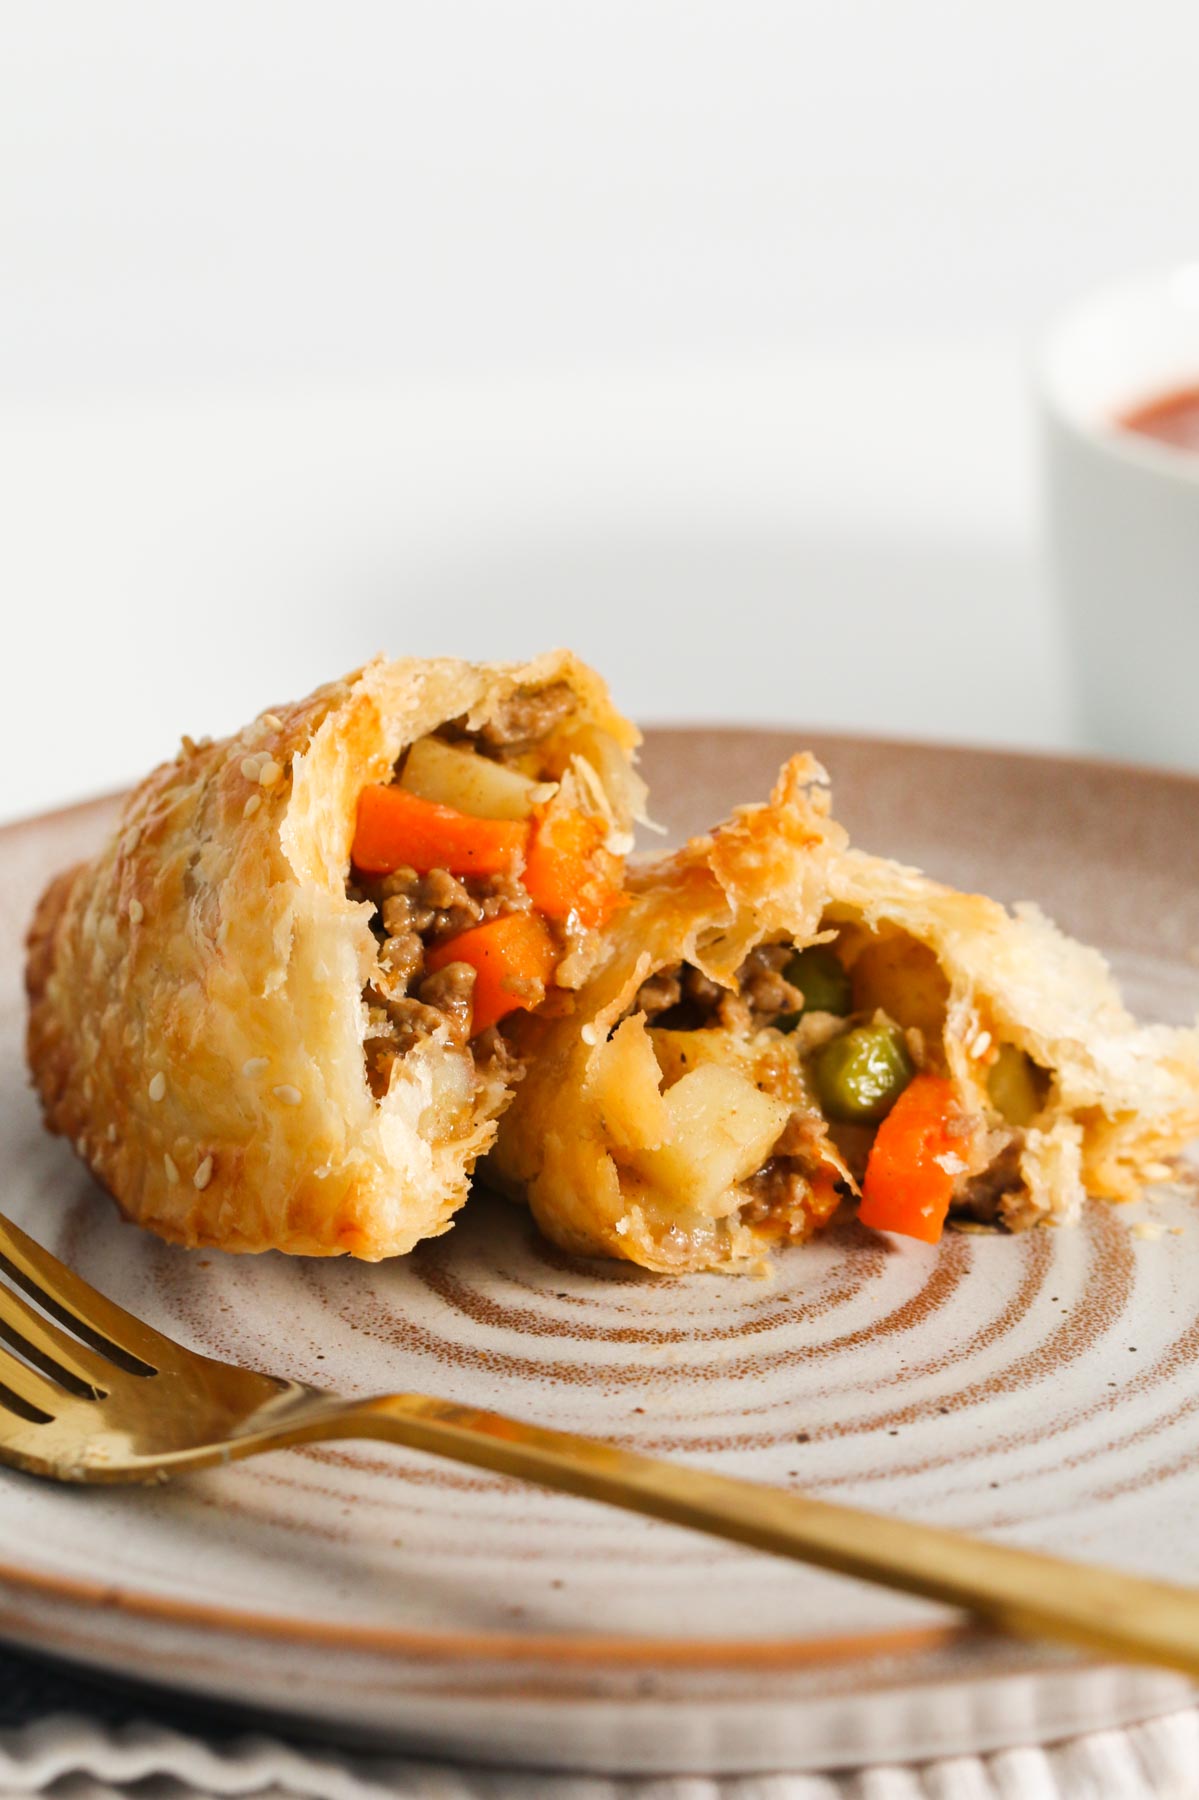 A savoury pastry, broken open to show the mince and vegetables inside, on a plate with a gold fork.